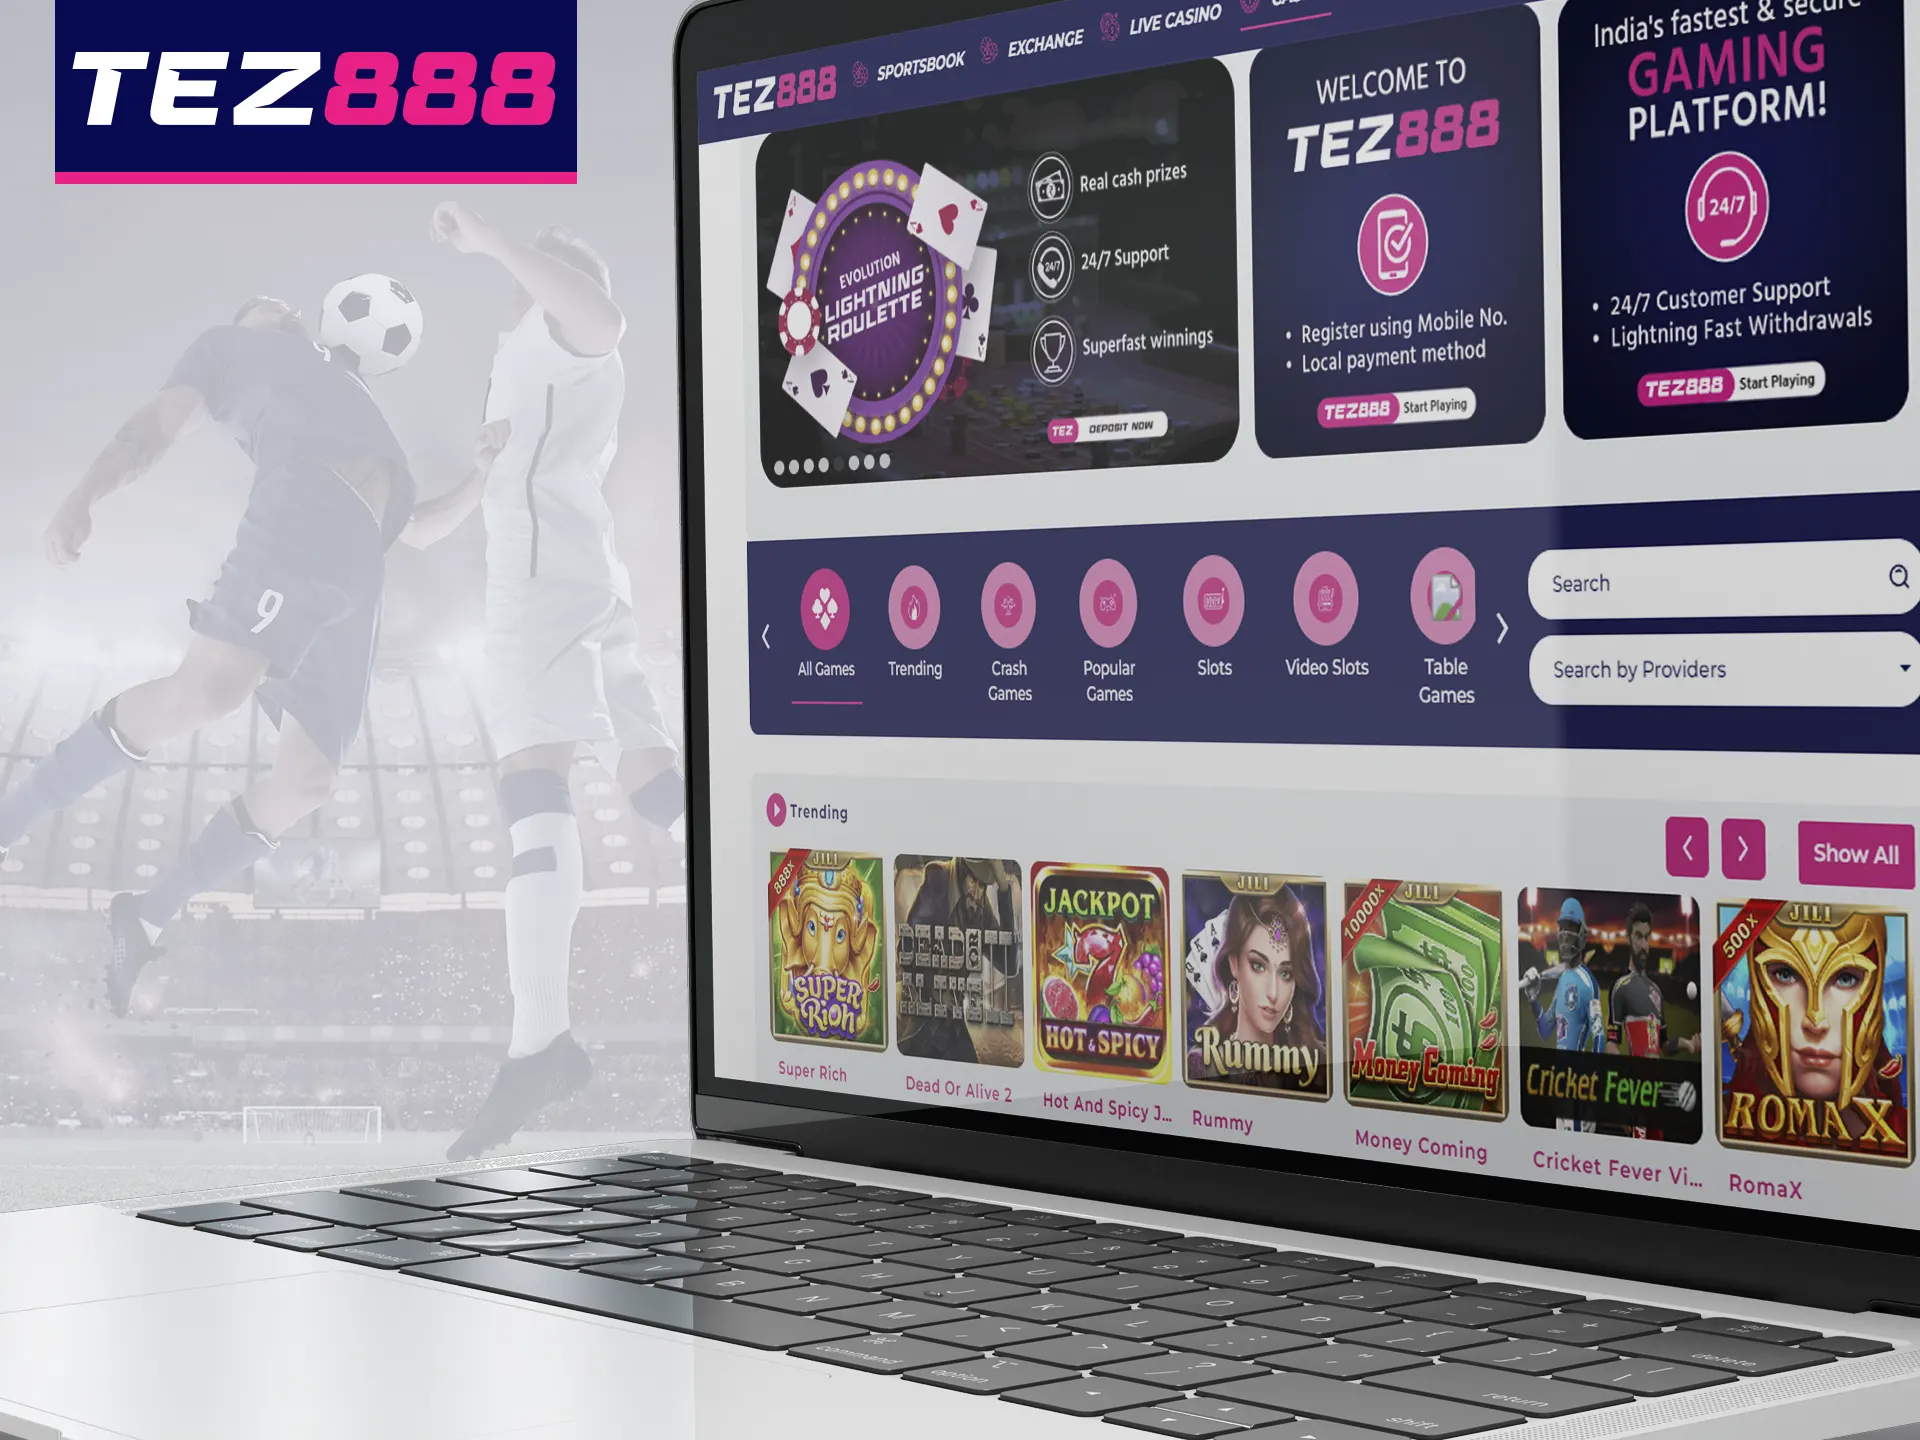 The Tez888 website has a user-friendly interface and colourful design.